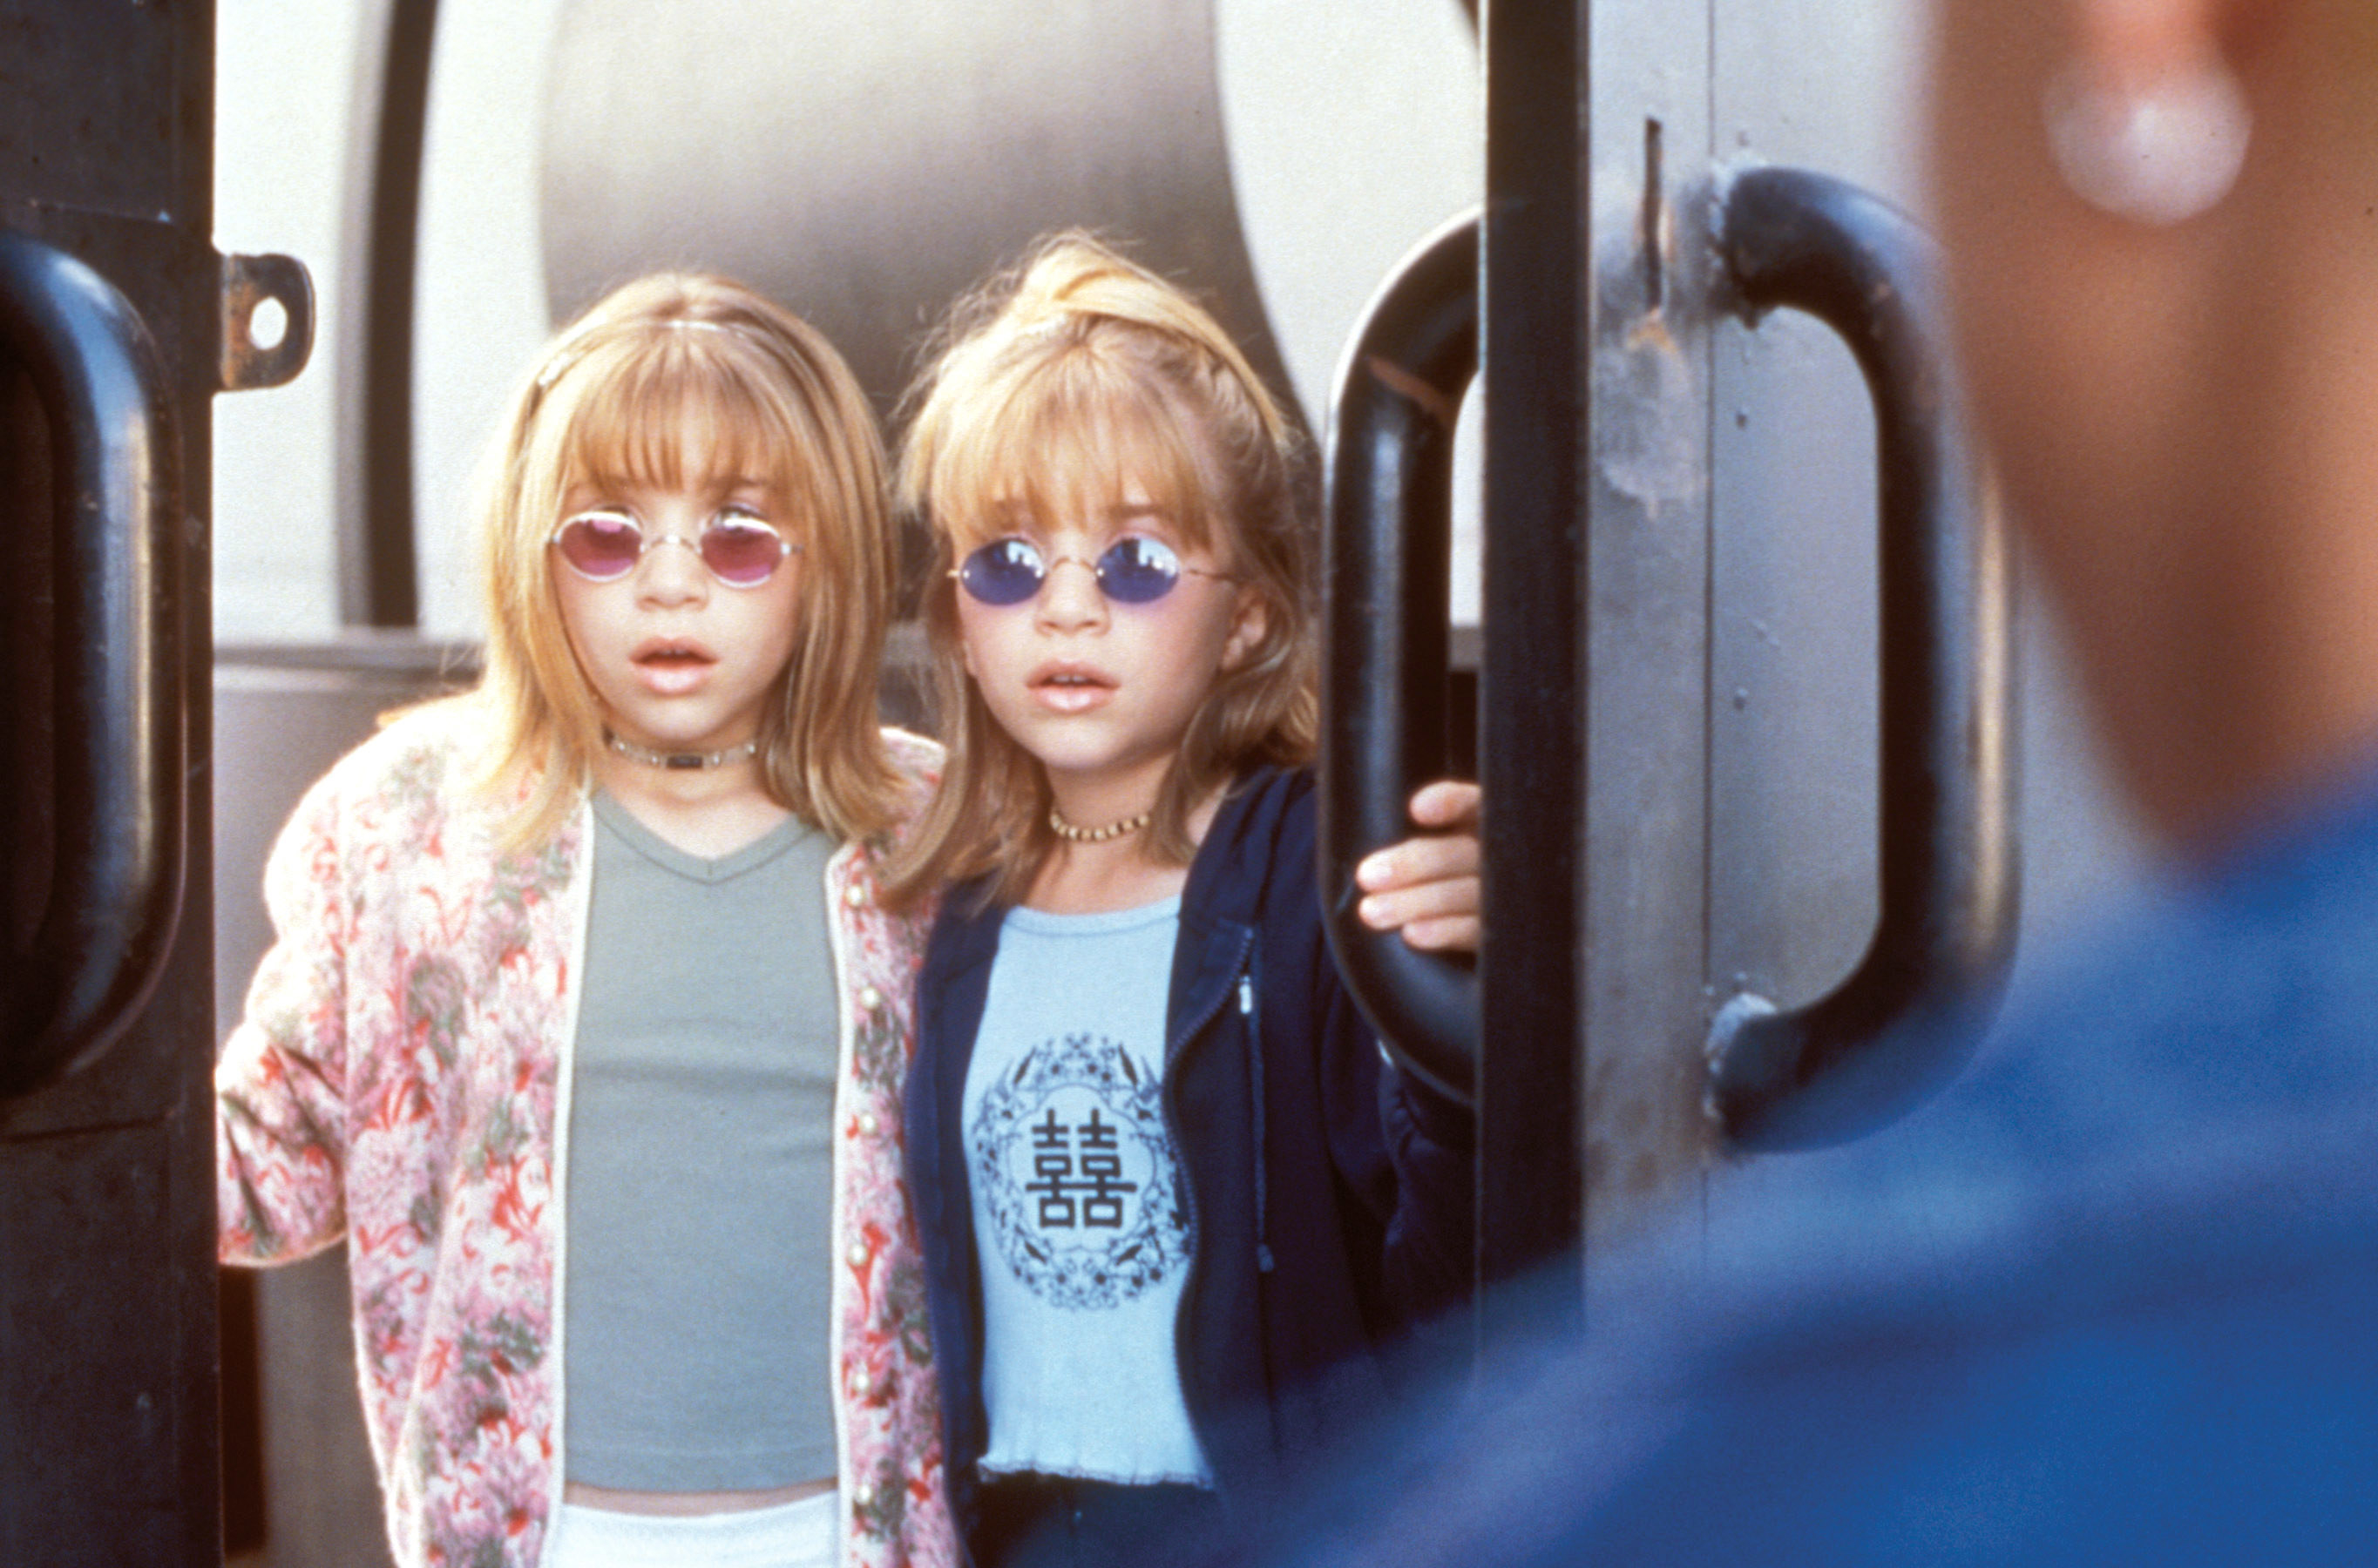 the Olsen twins wearing sunglasses, T-shirts, and jackets